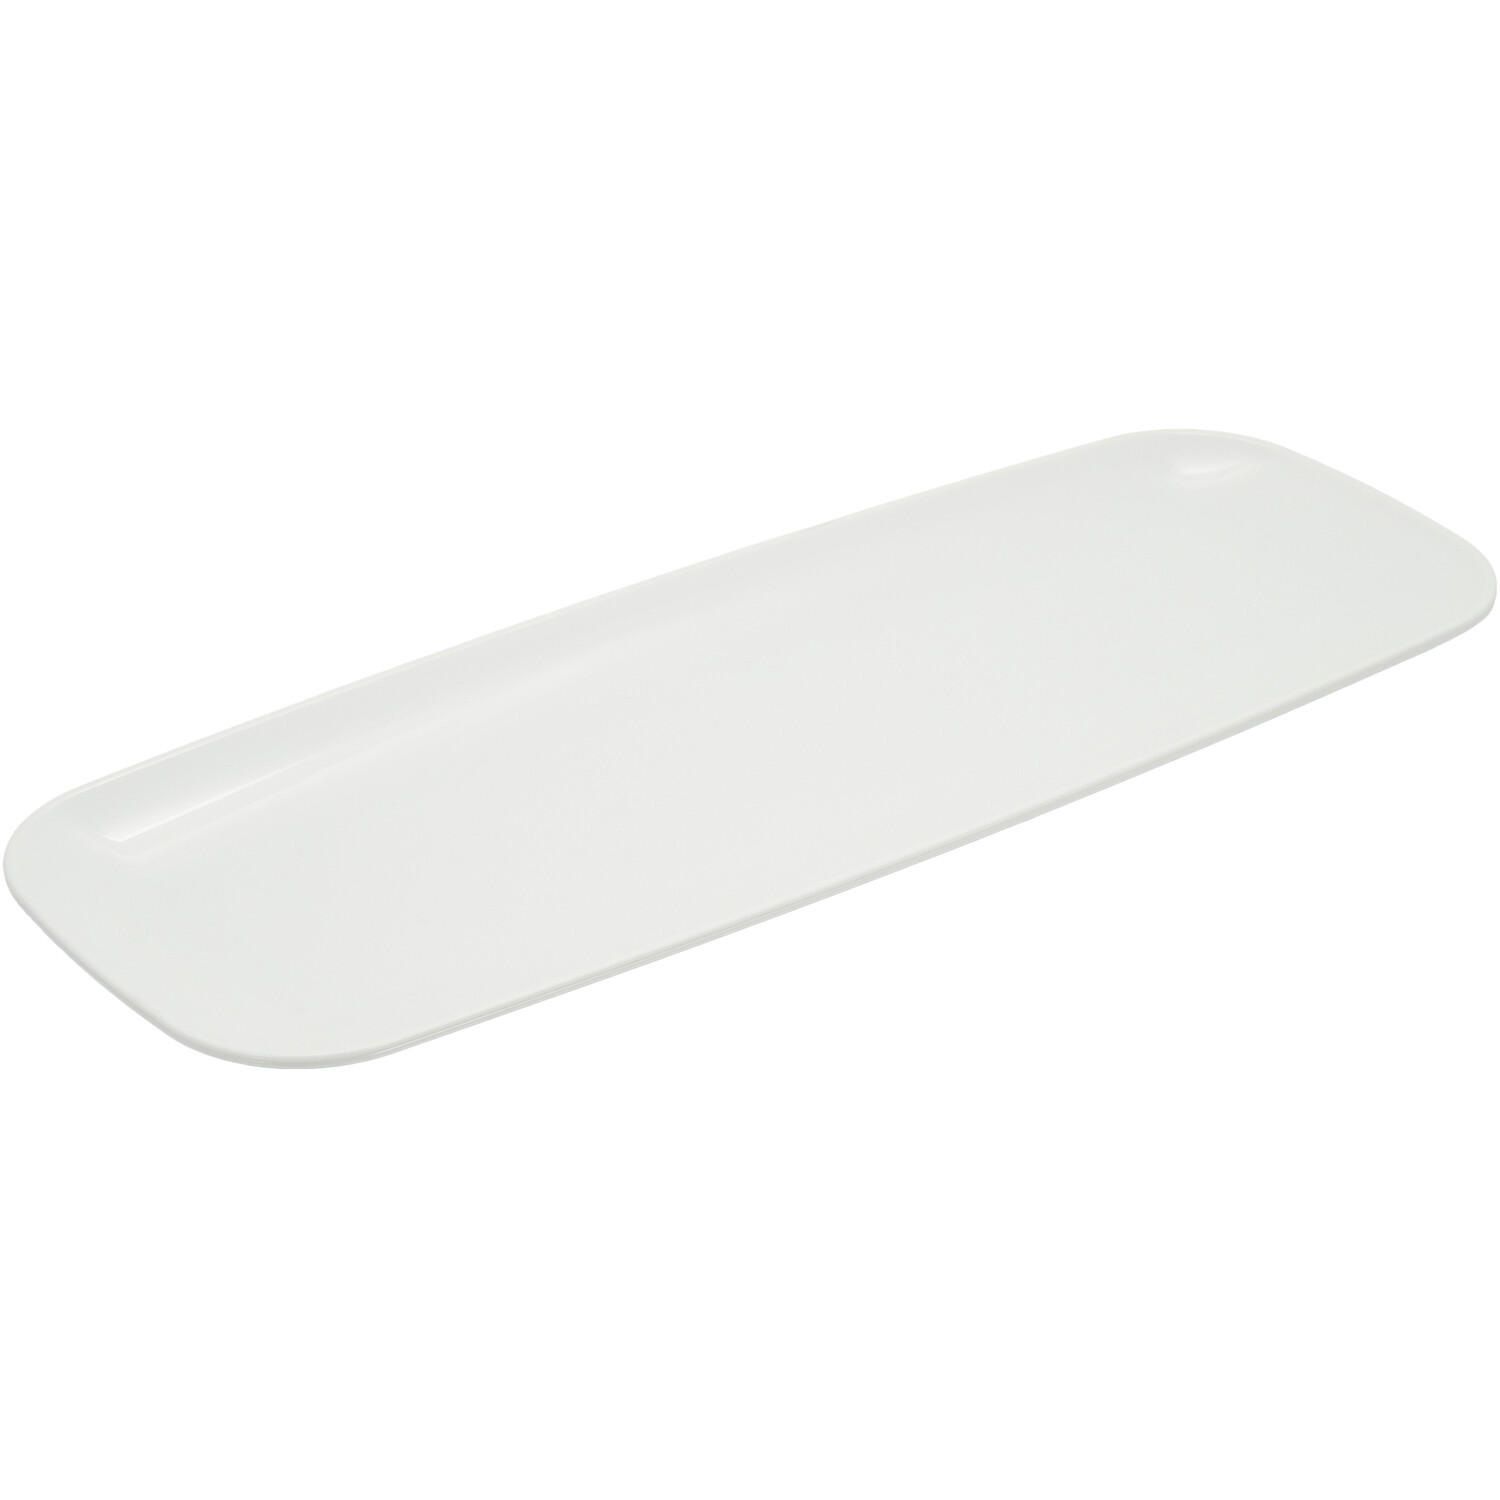 Pack of 2 Long Rectangle Serving Platters - White Image 5